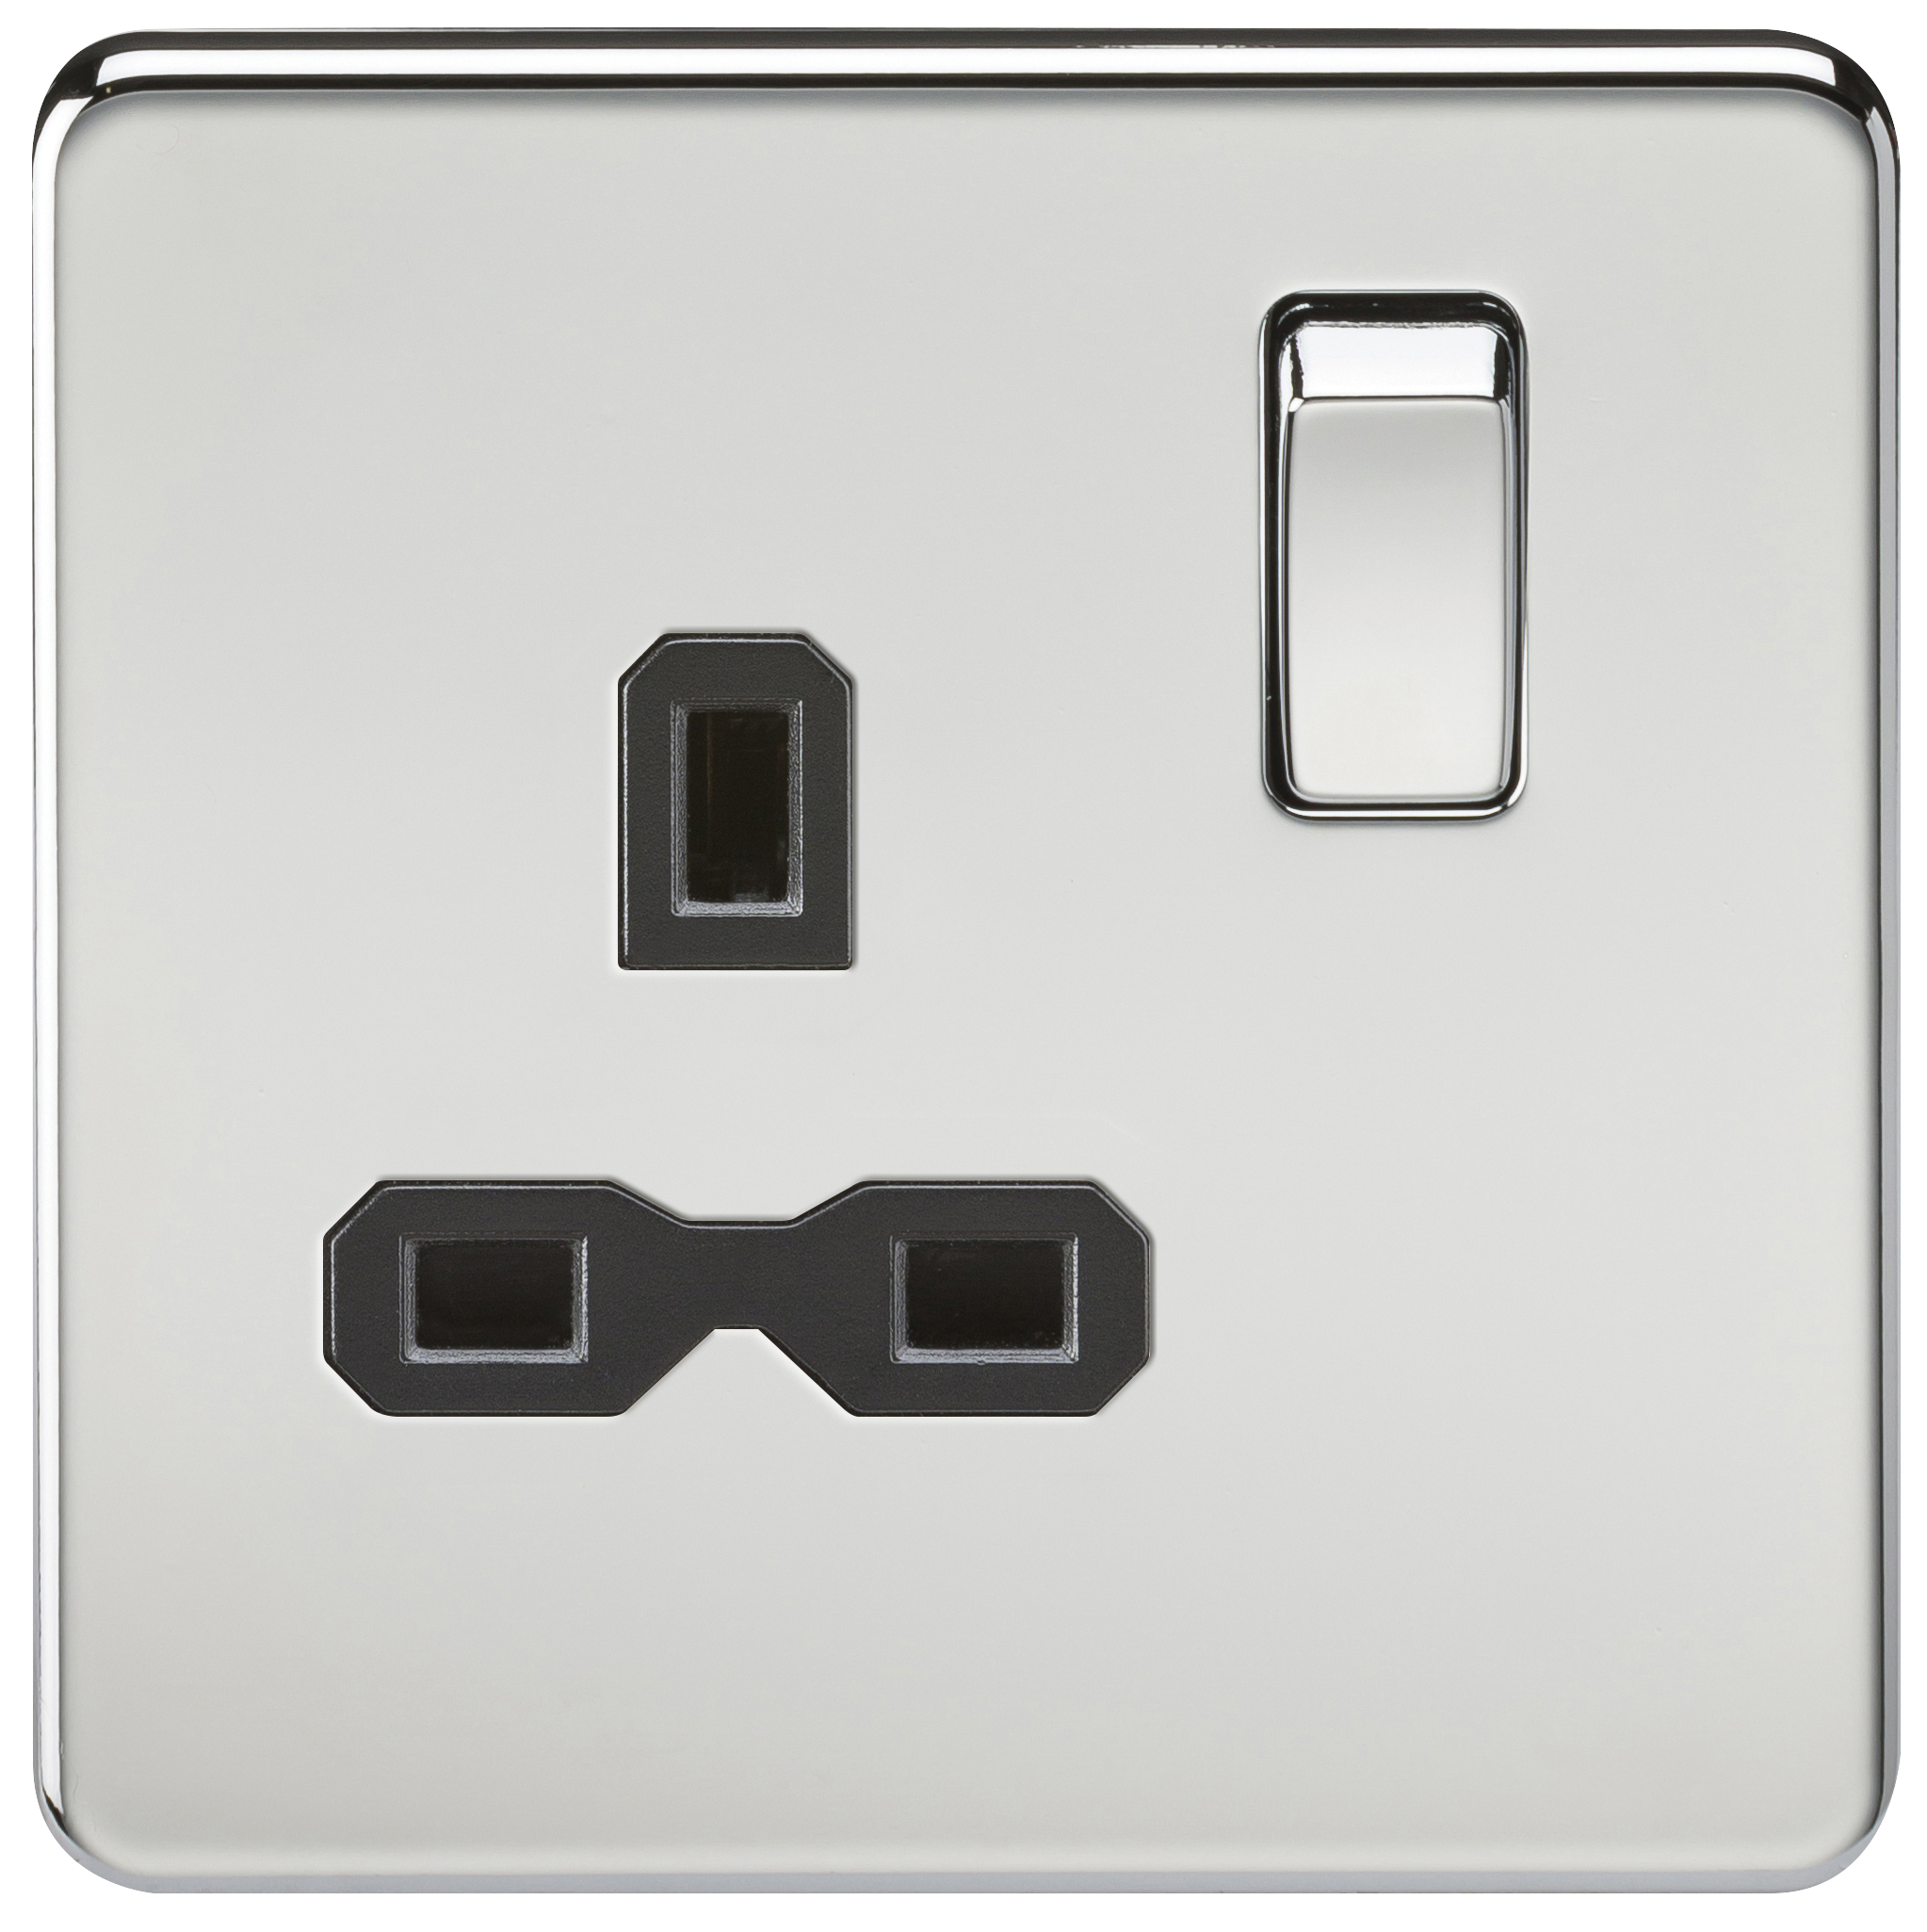 Screwless 13A 1G DP Switched Socket - Polished Chrome With Black Insert - SFR7000PC 